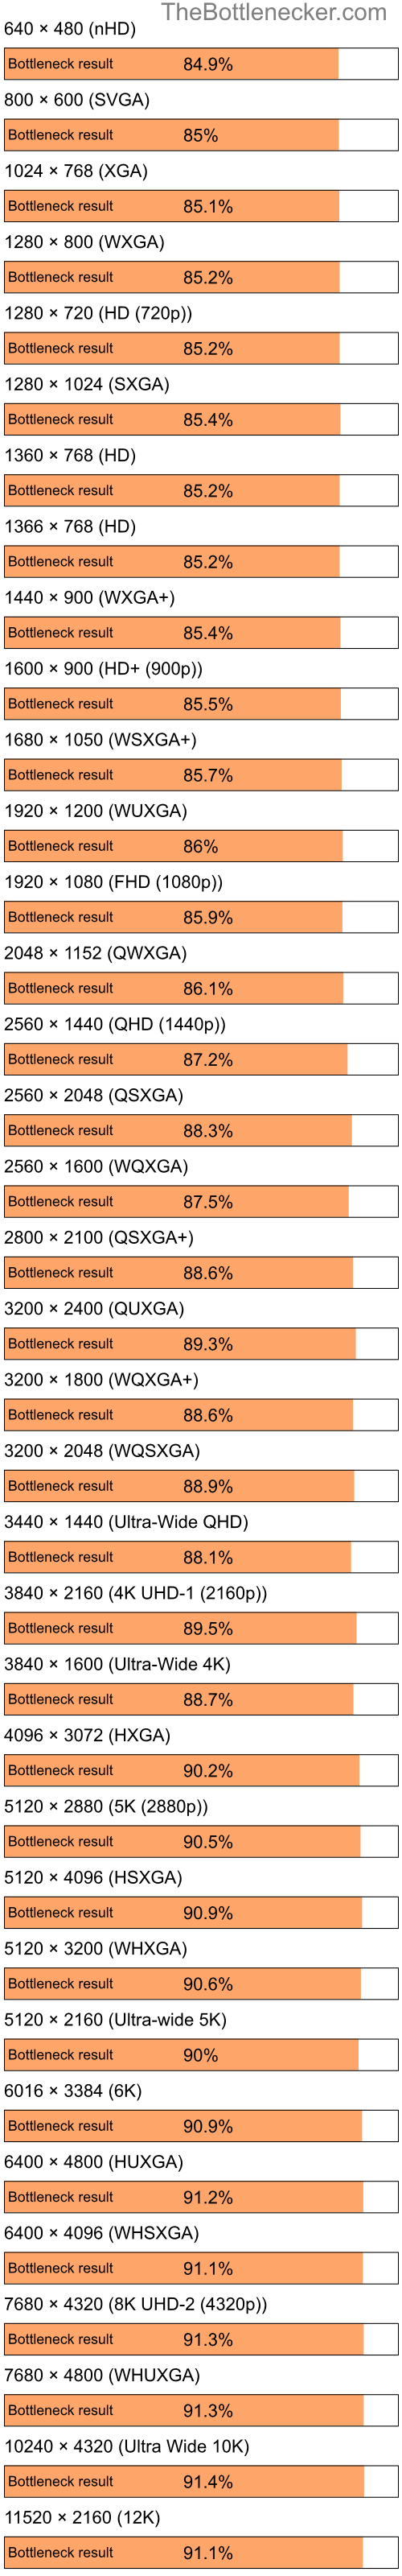 Bottleneck results by resolution for Intel Pentium 4 and NVIDIA GeForce FX Go 5200 in Processor Intense Tasks